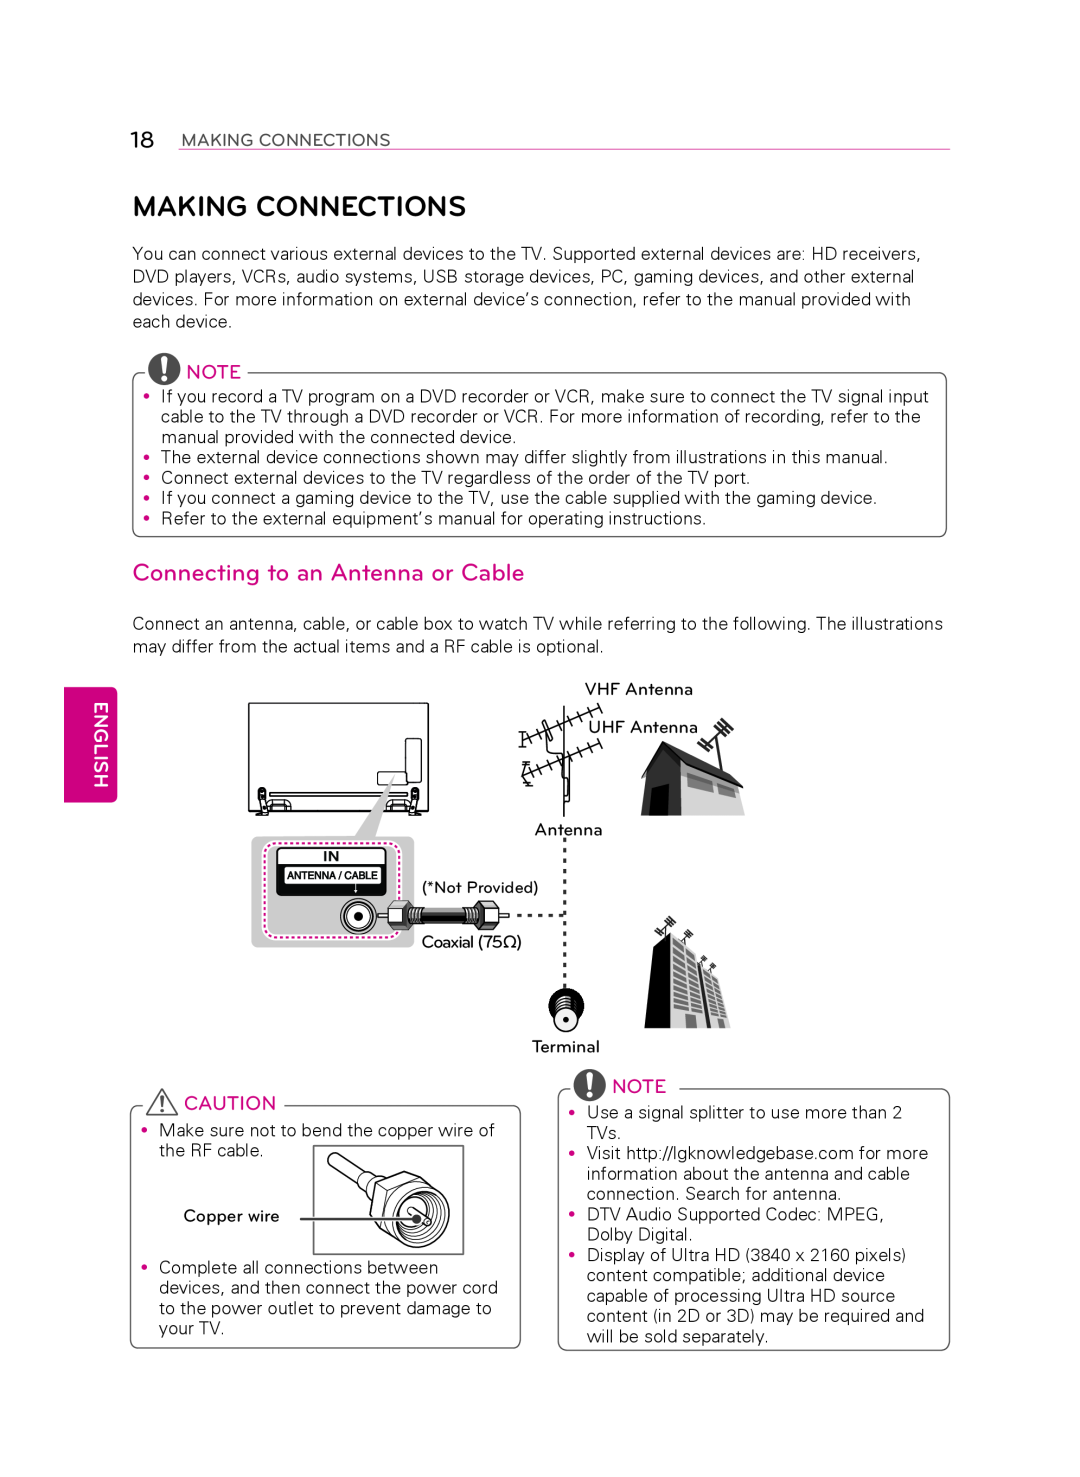 LG Electronics 55LA9650 owner manual Making Connections, Connecting to an Antenna or Cable, English 